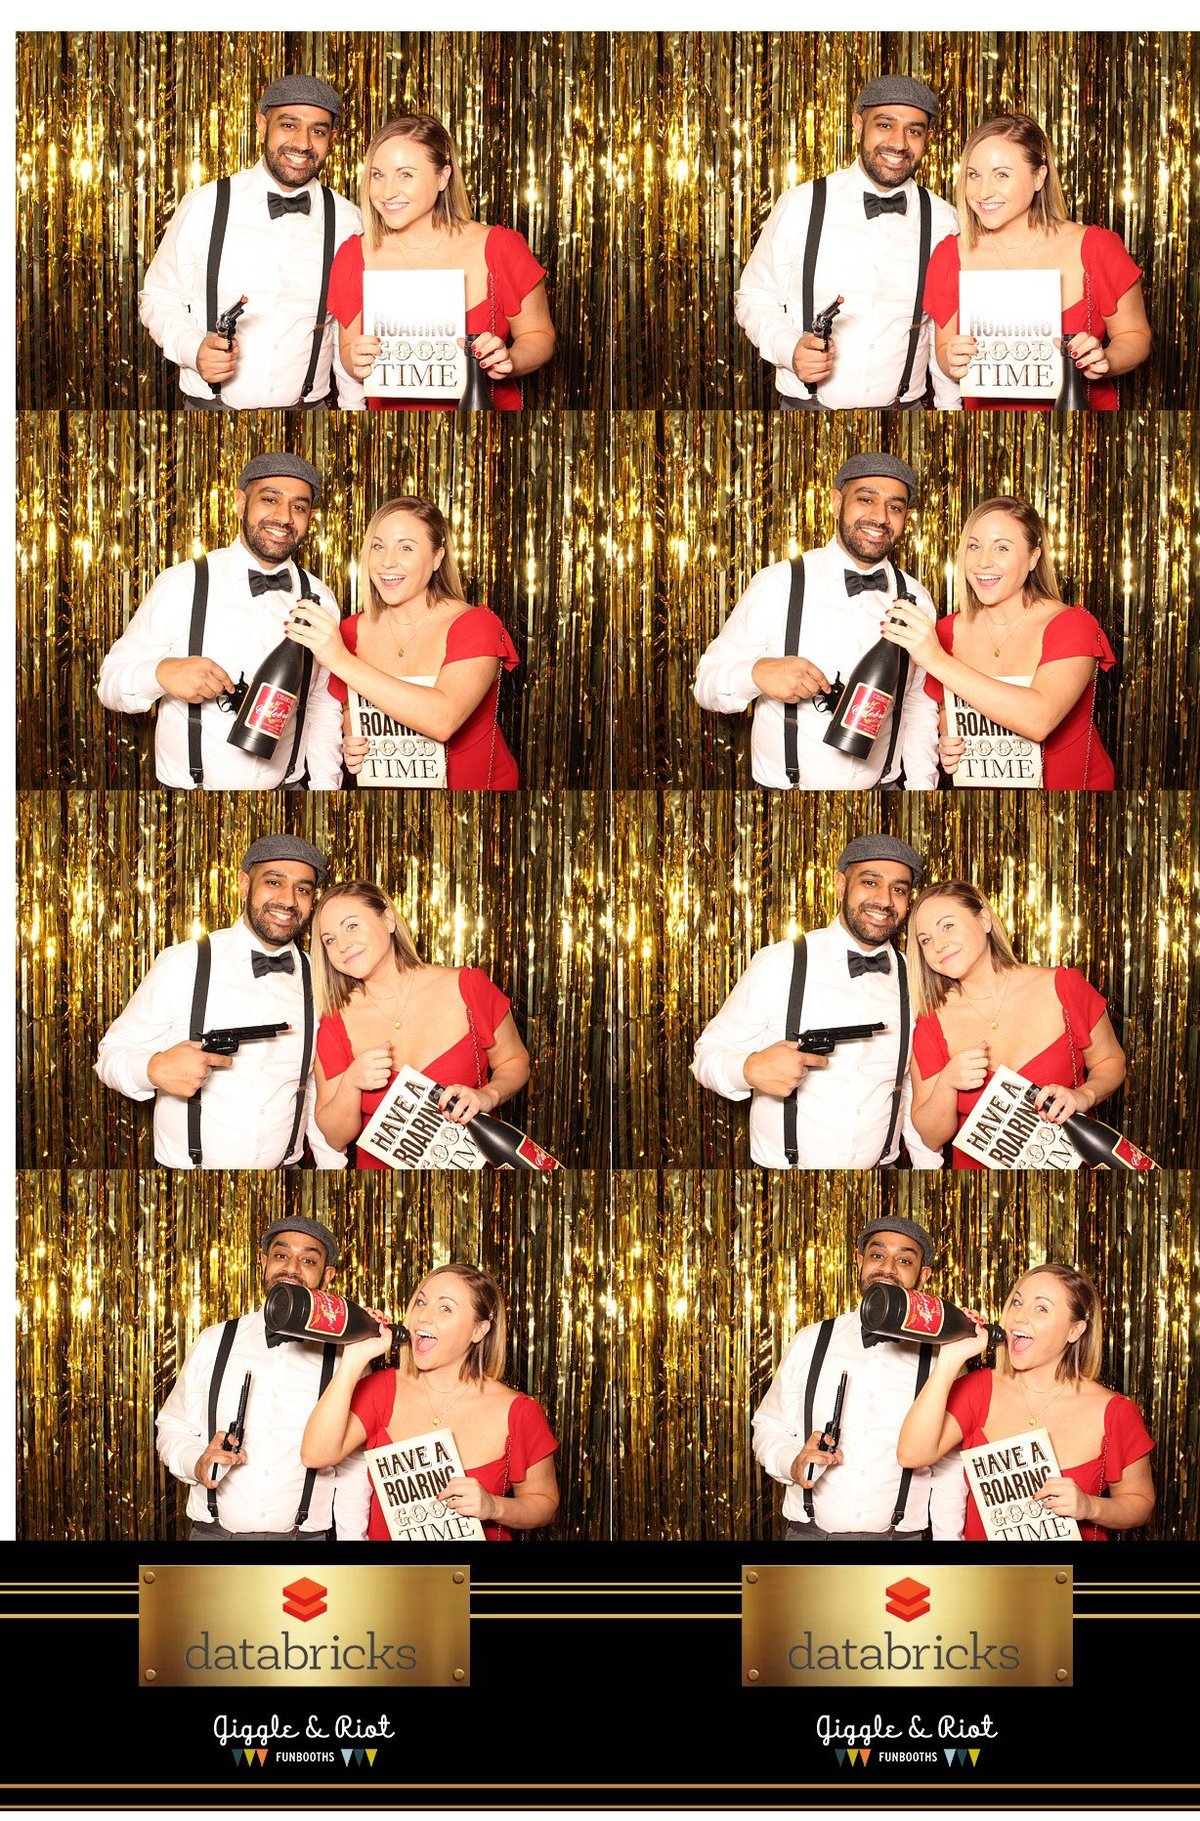 quality prints photo booth